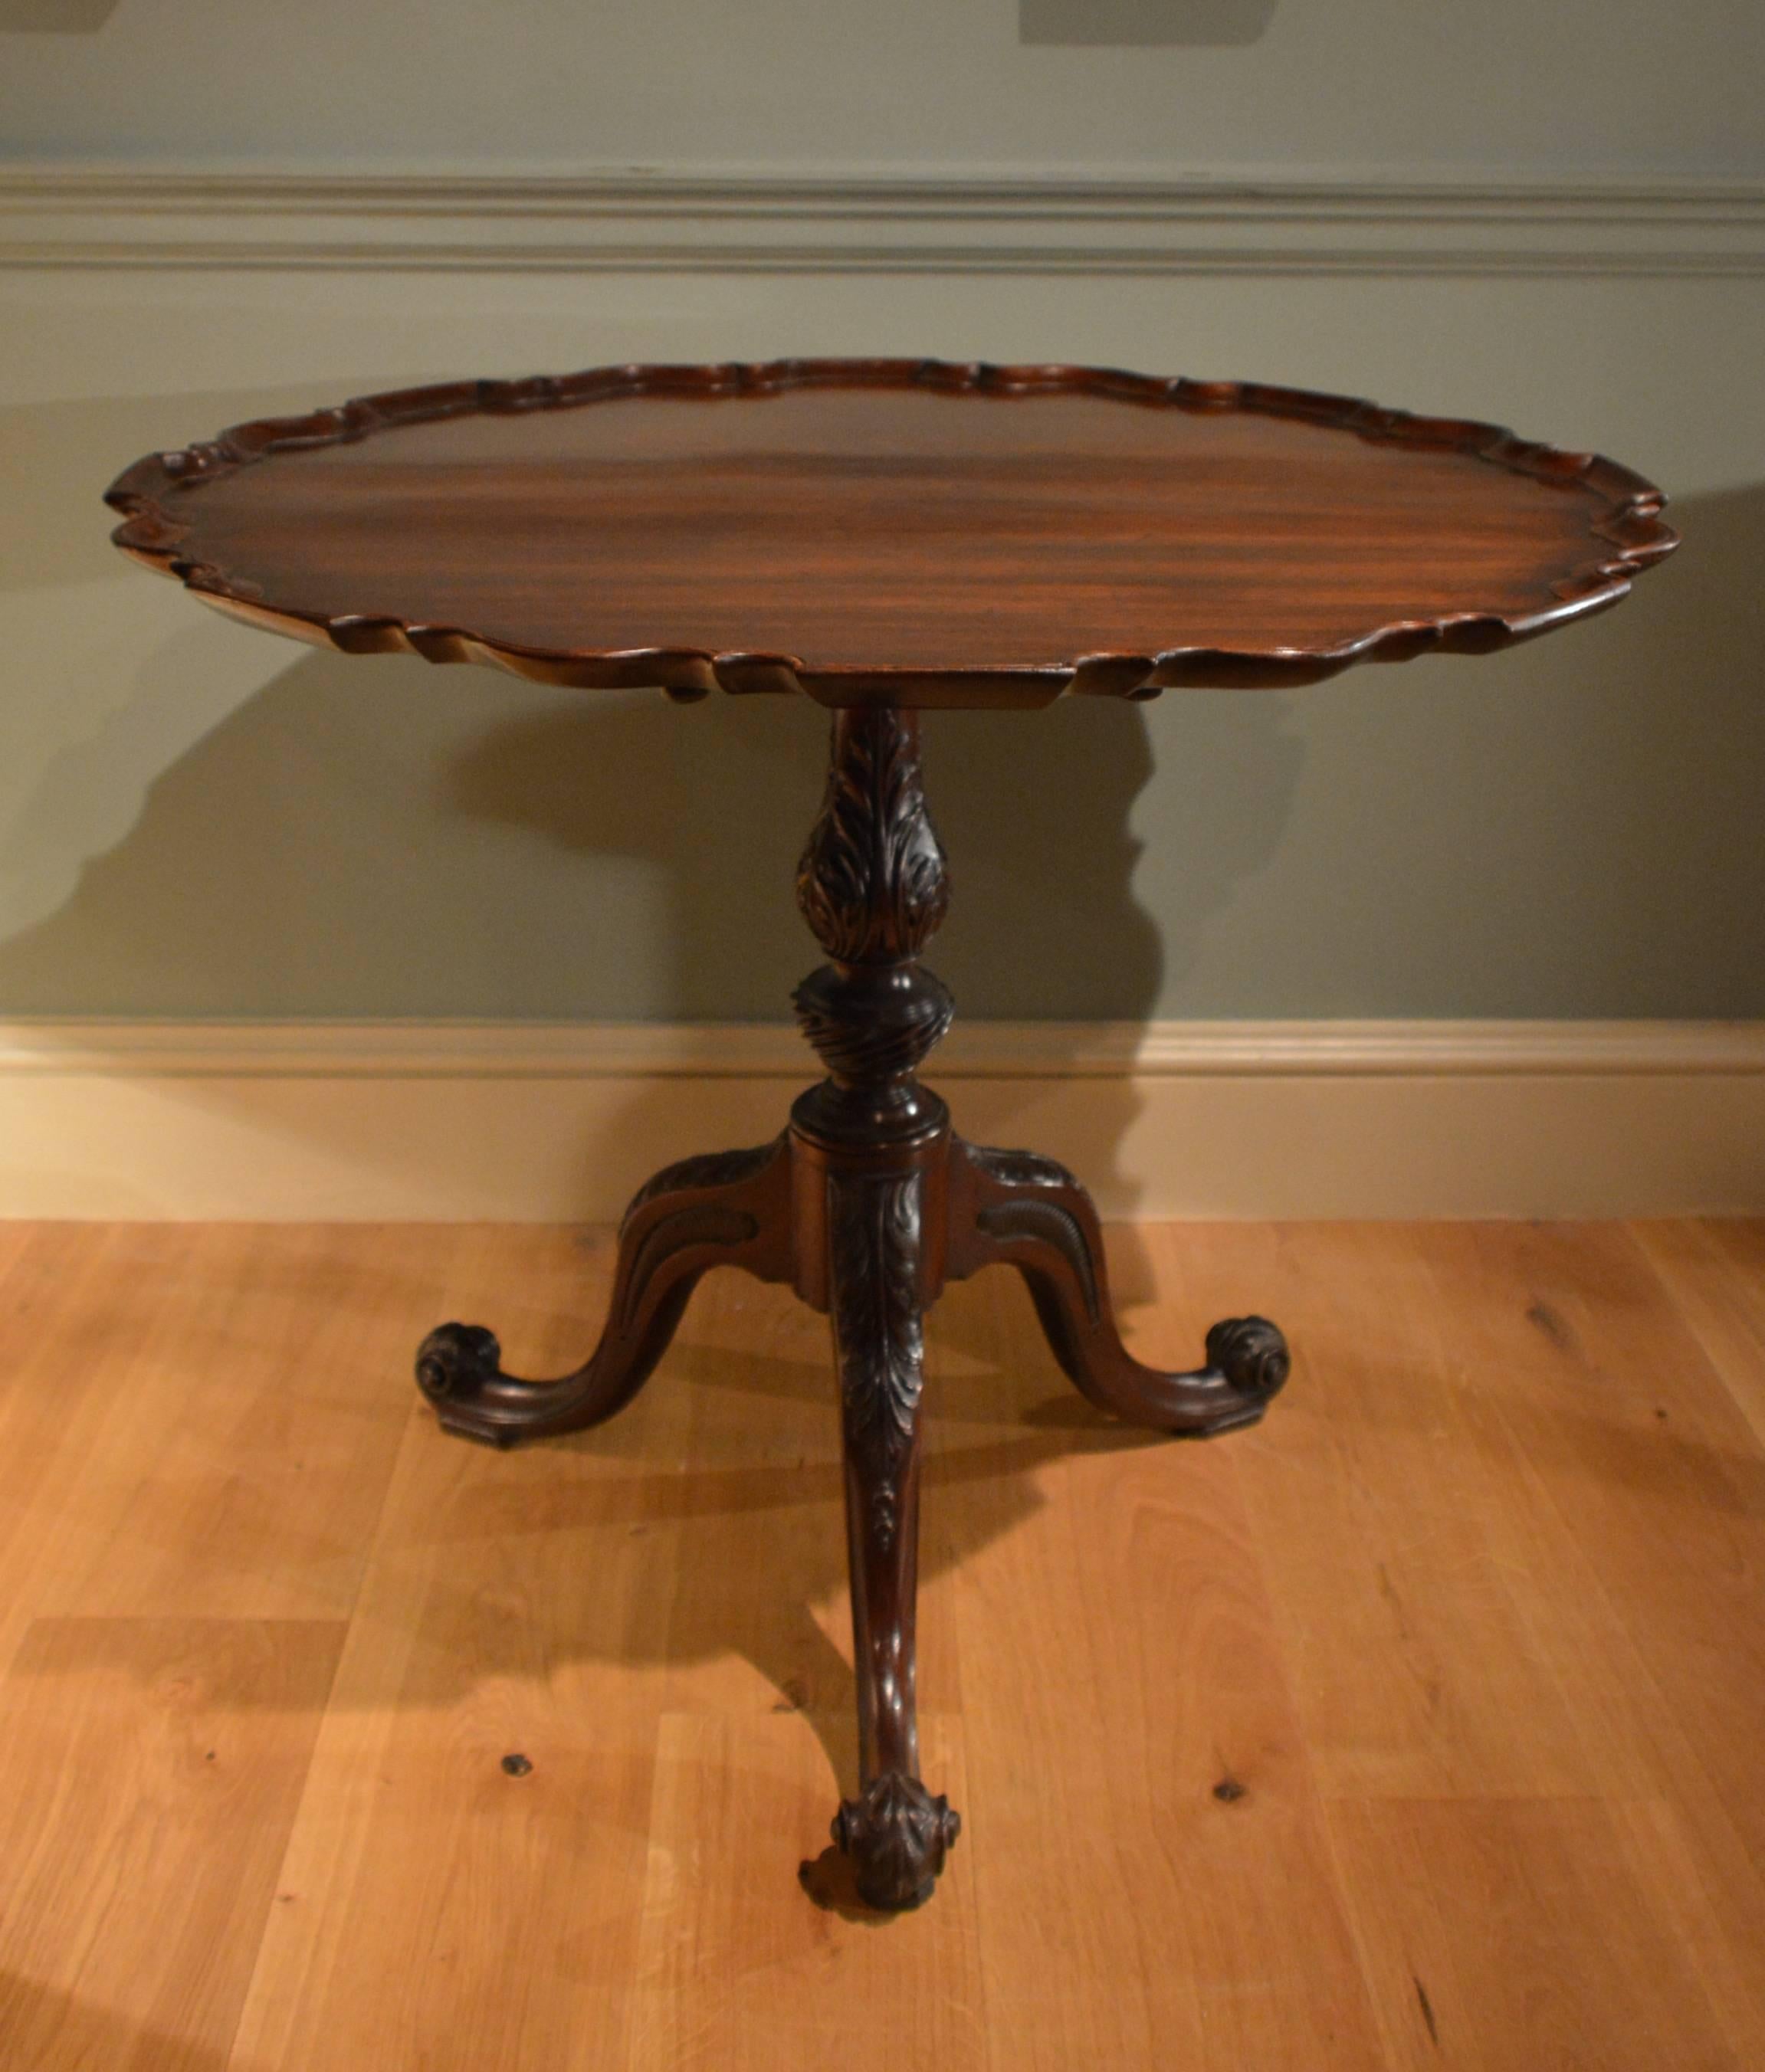 A fine George III mahogany tripod table, the stem and knees enriched with acanthus carving, the legs ending in boldly scrolled toes.
English Circa 1760